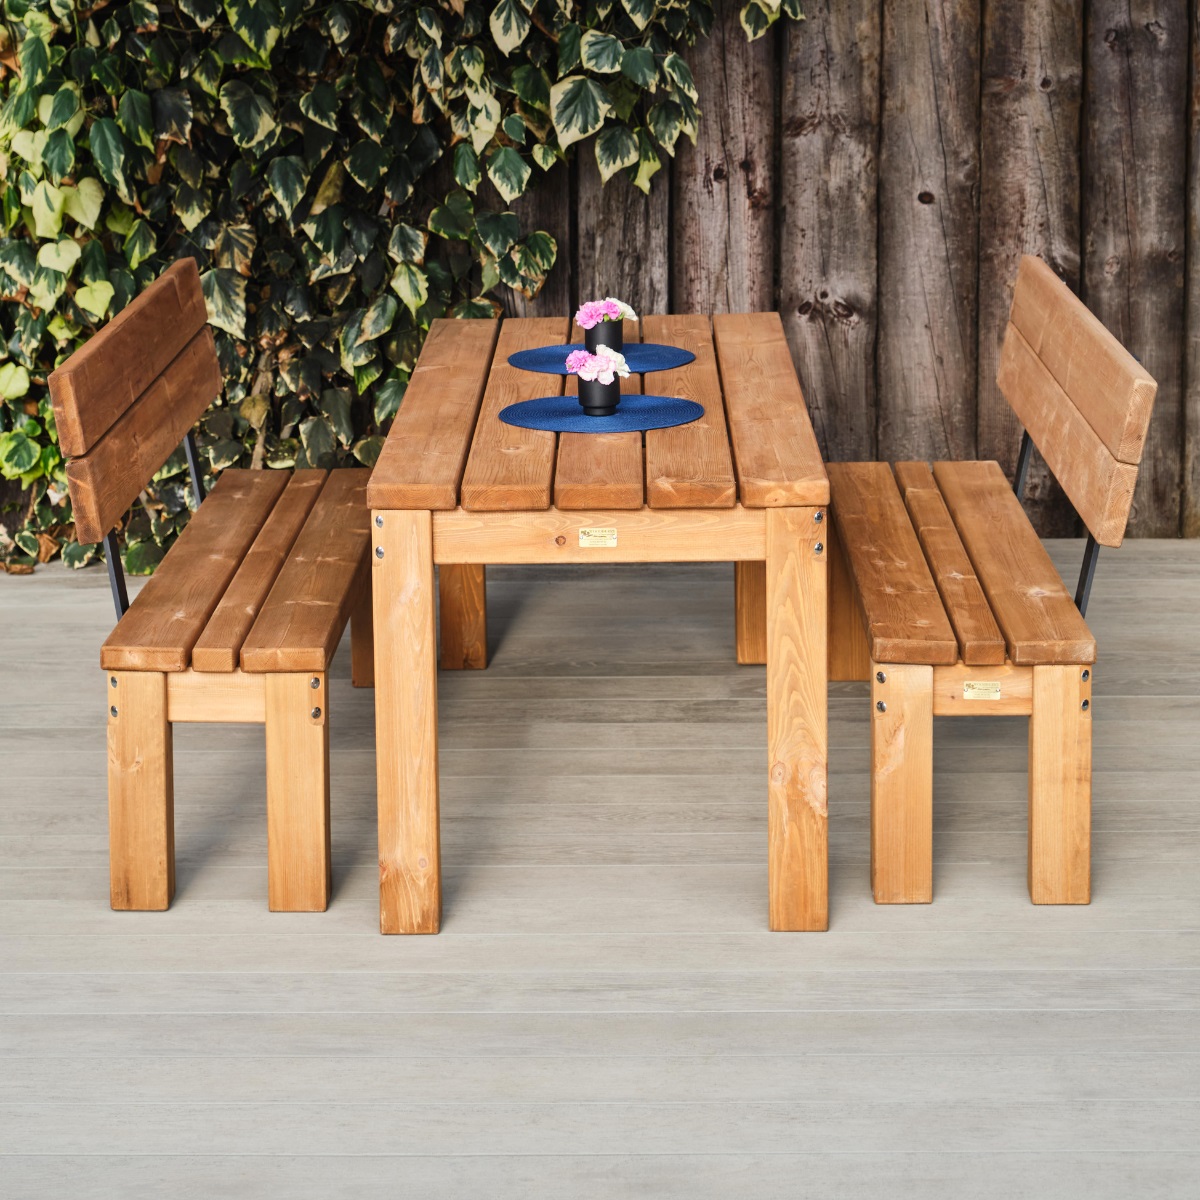 Commercial wooden dining table and benches with backrest